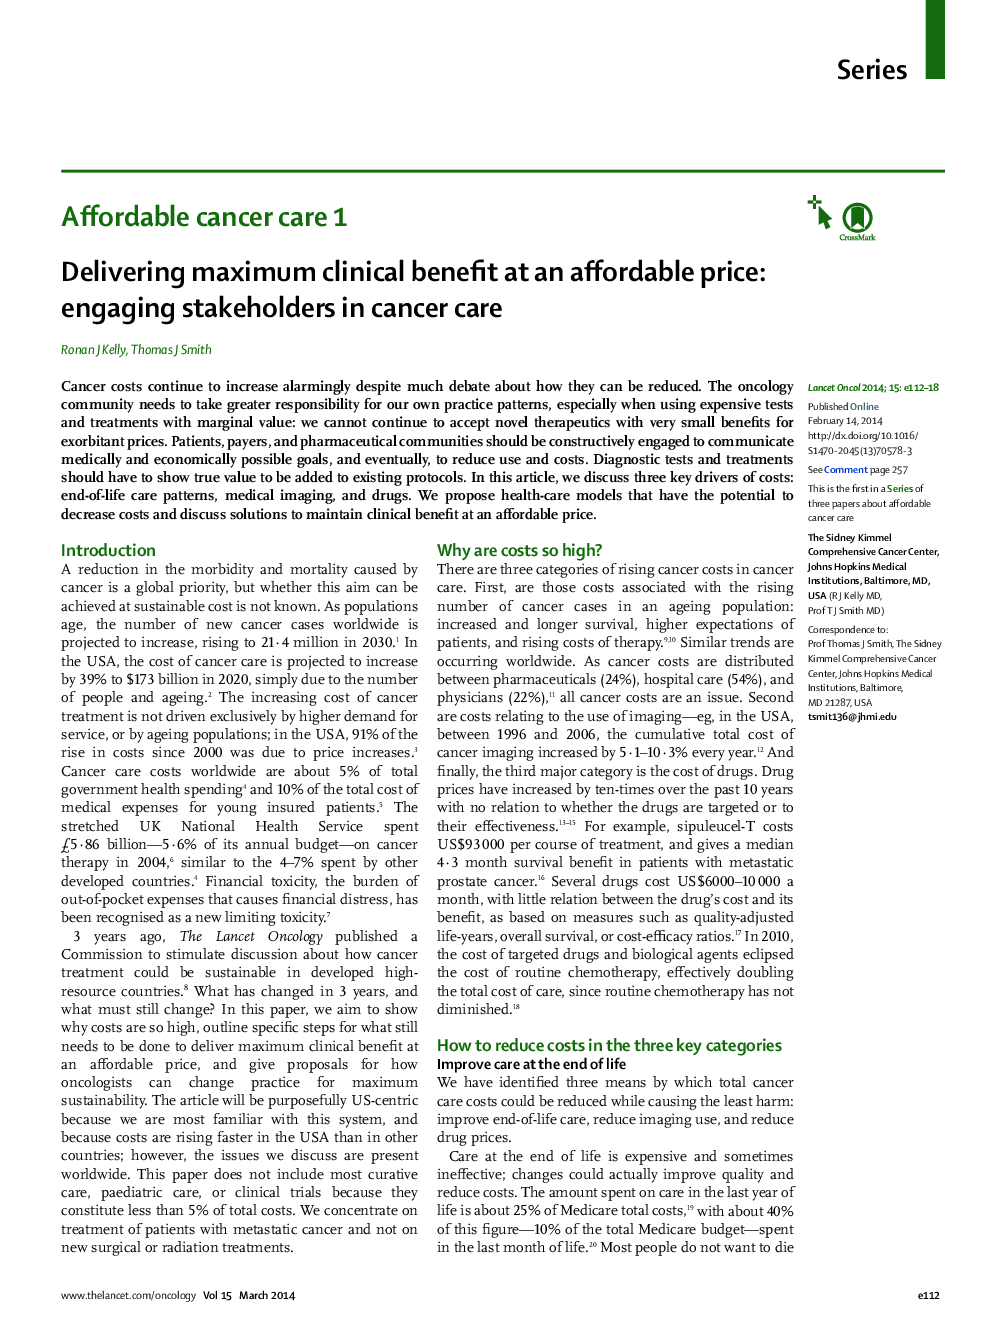 Delivering maximum clinical benefit at an affordable price: engaging stakeholders in cancer care